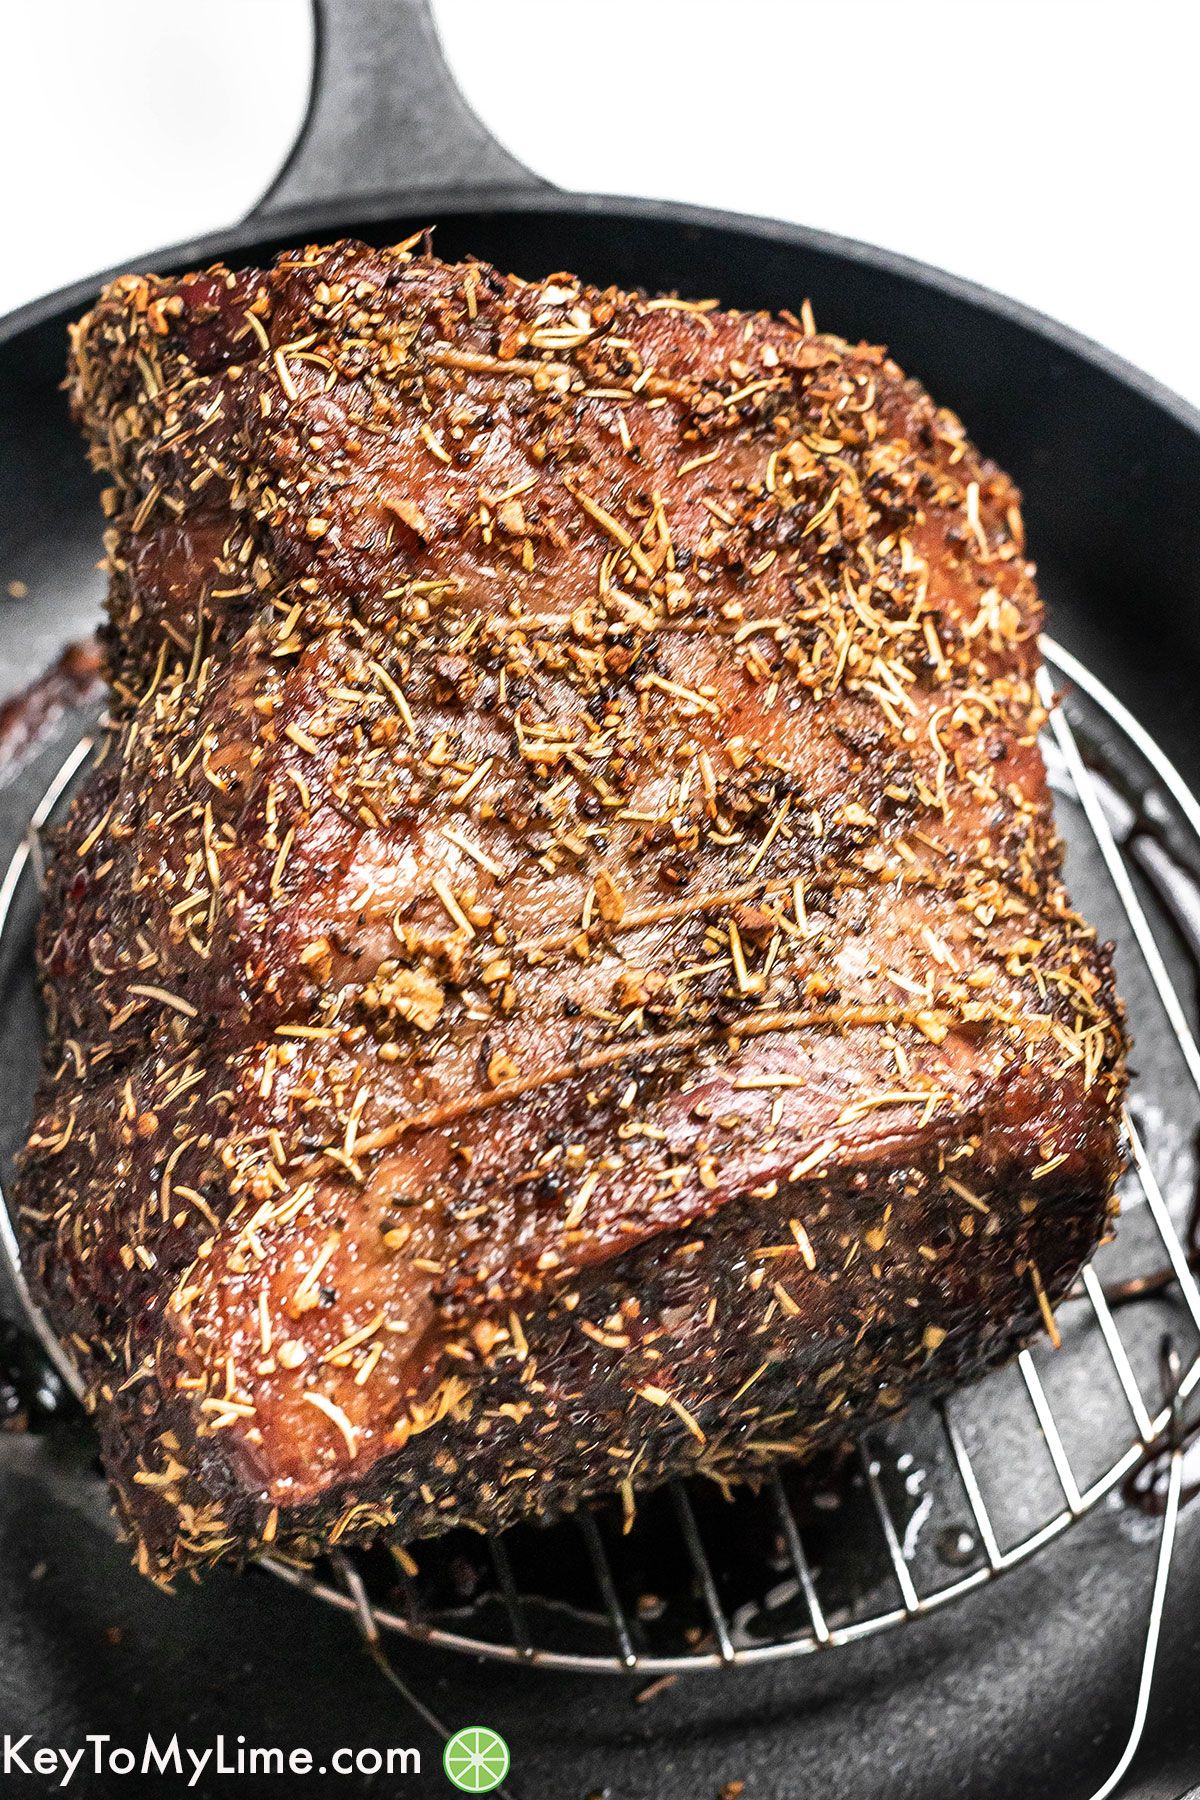 A full roast covered in delicious seasonings in a cast iron skillet after being seared.